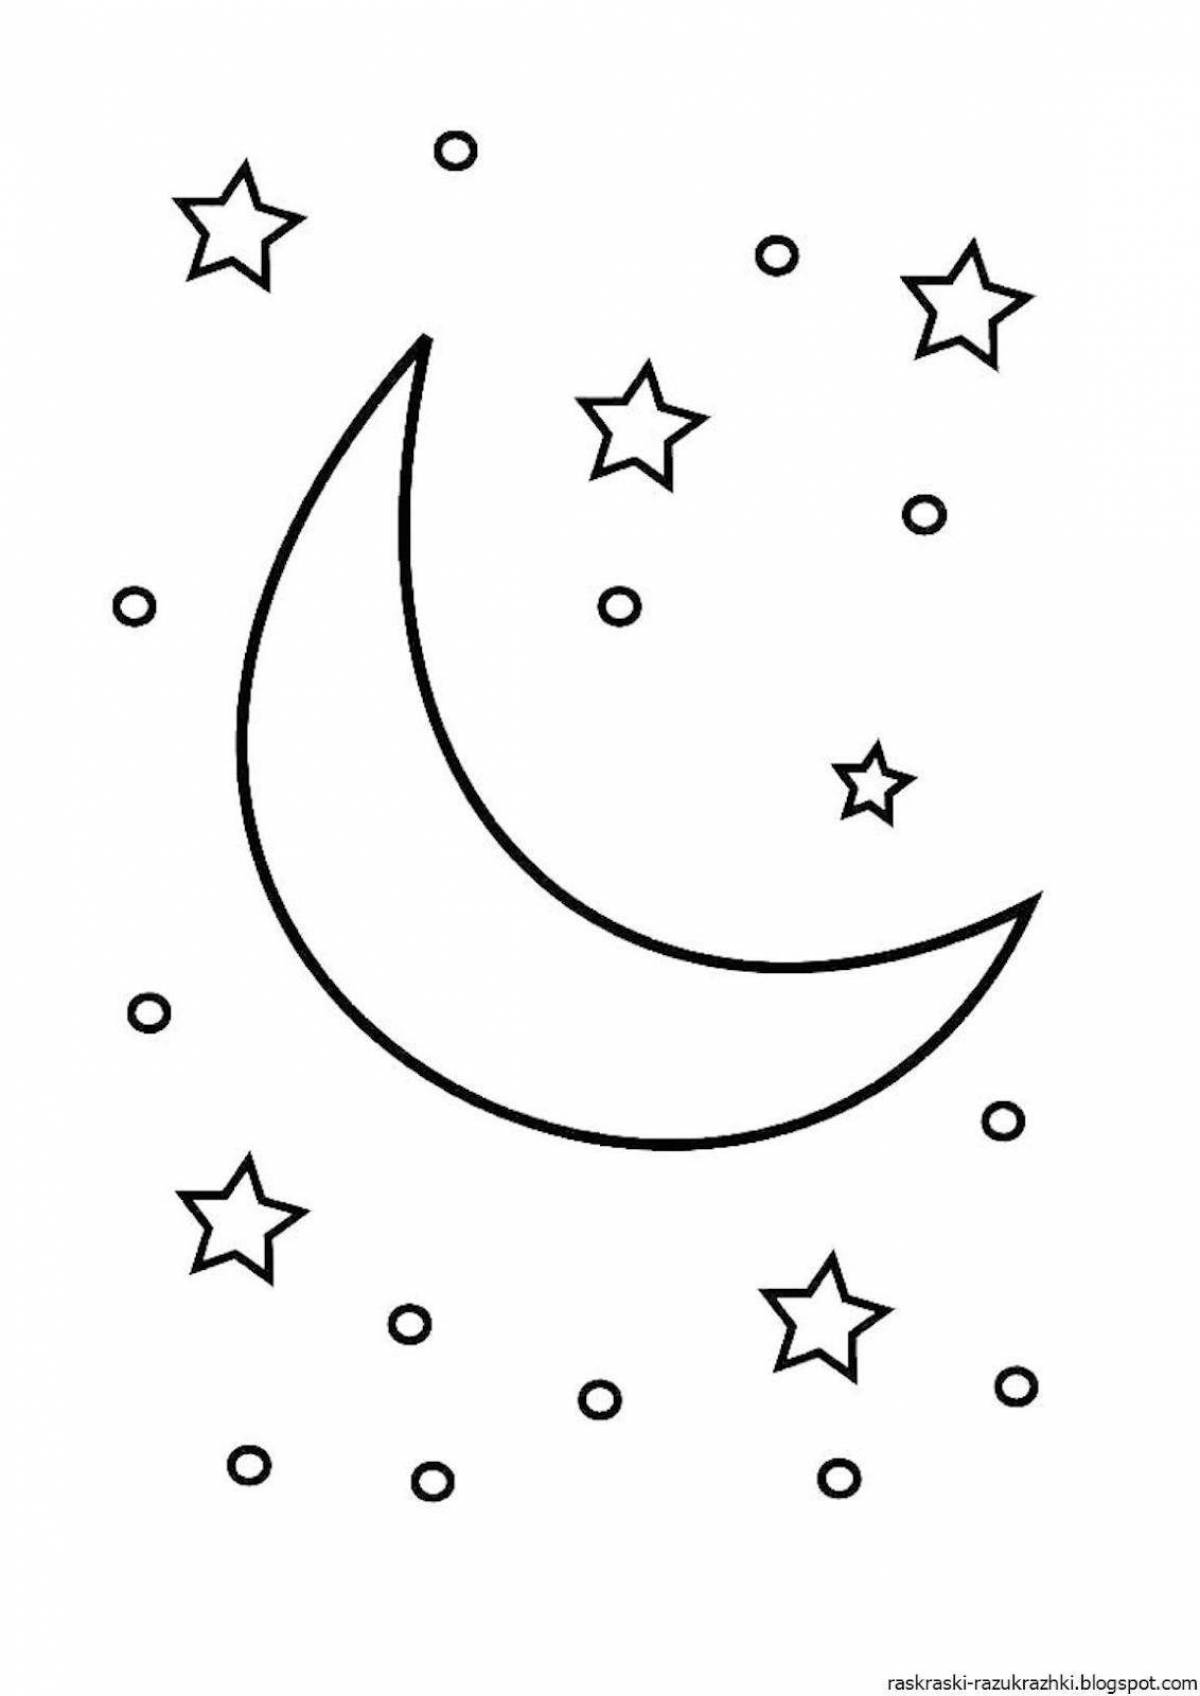 Exquisite starry sky coloring book for kids